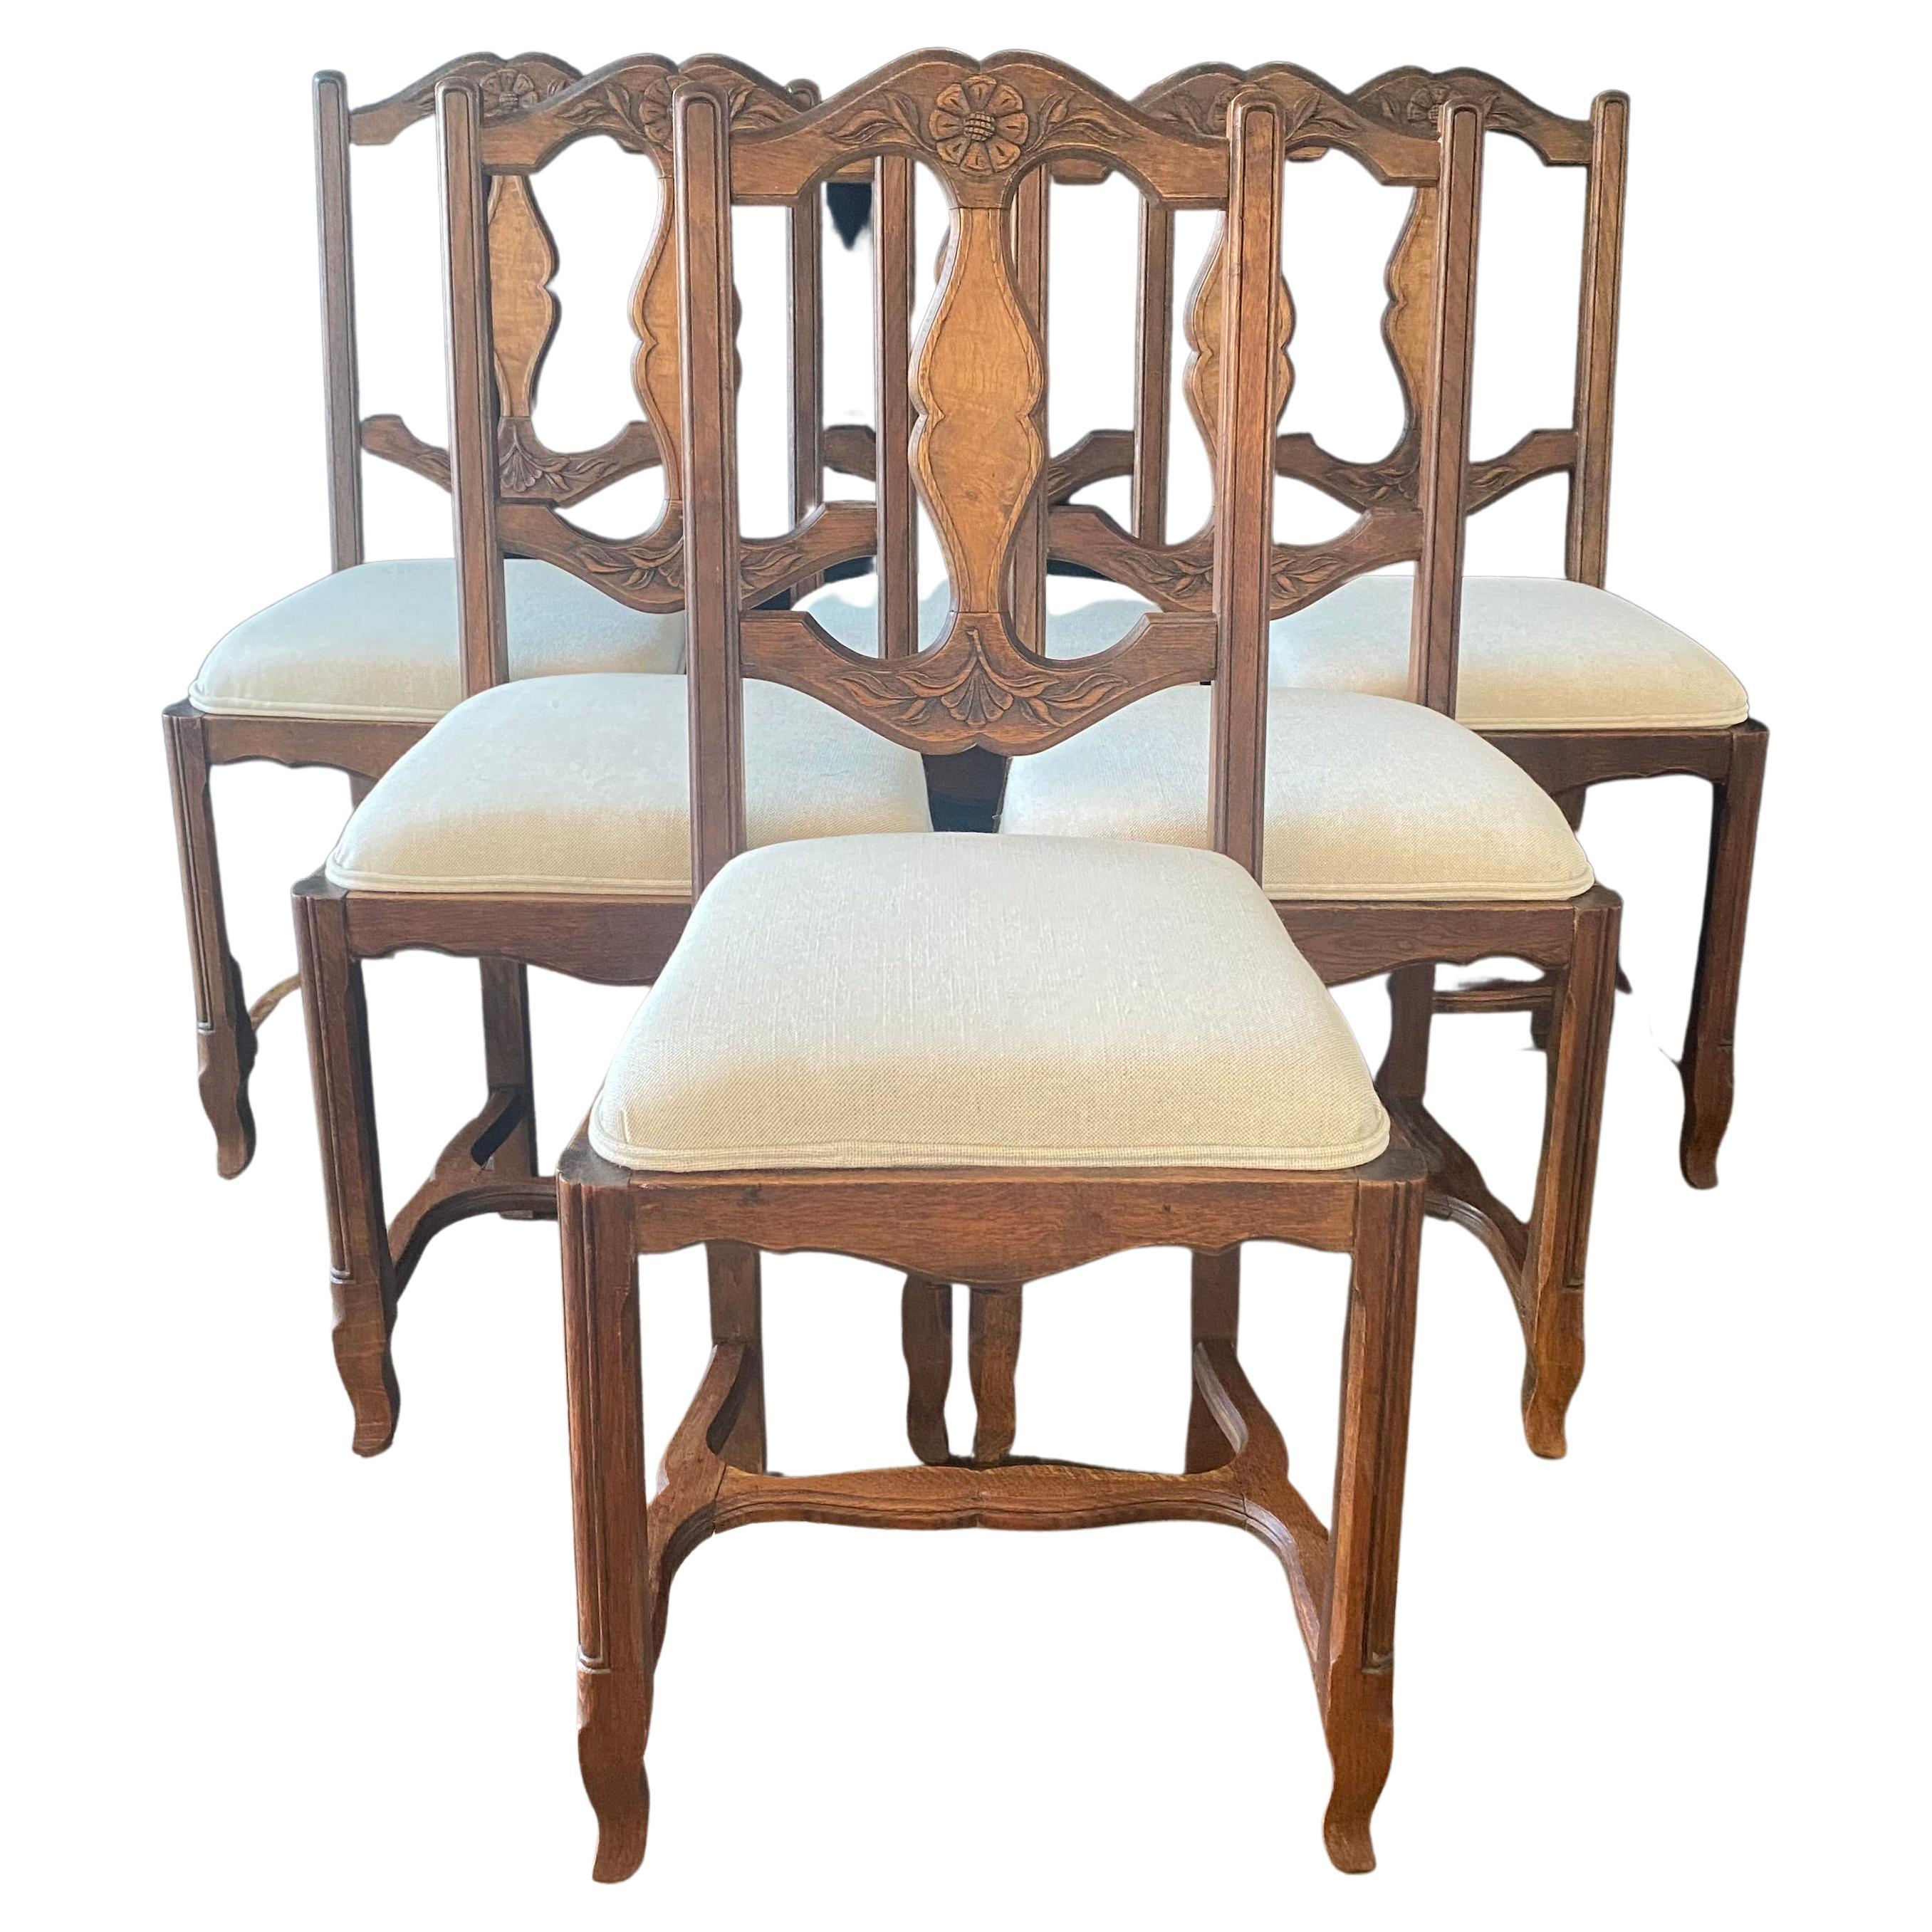 Charming Set of Six Country French Provincial Hand Carved Antique Oak Chairs